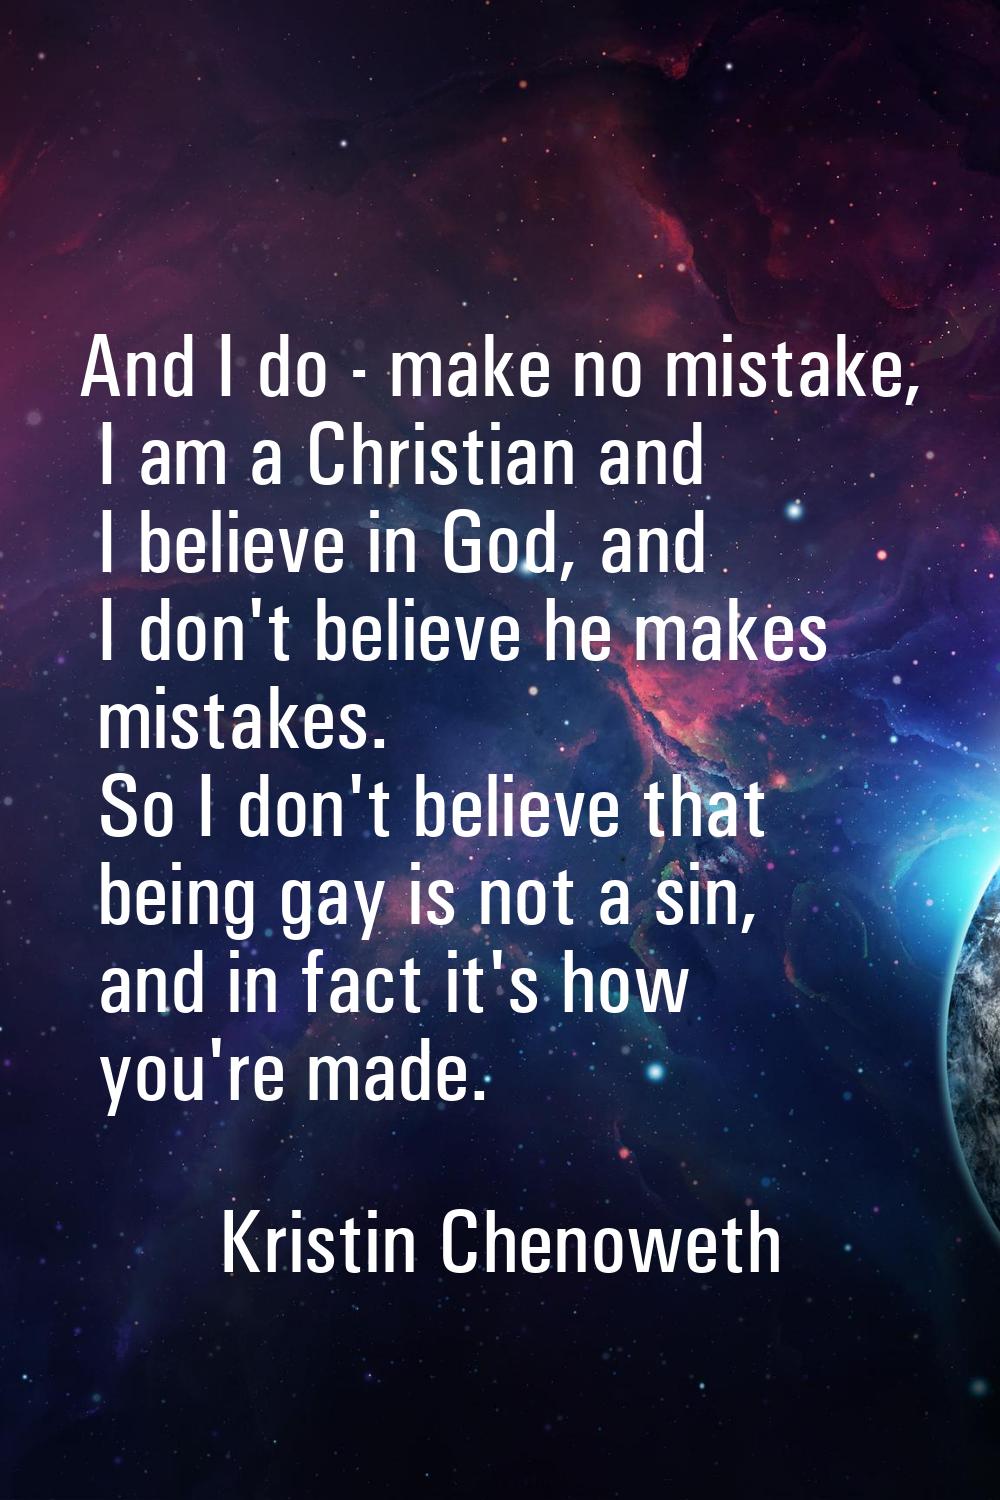 And I do - make no mistake, I am a Christian and I believe in God, and I don't believe he makes mis